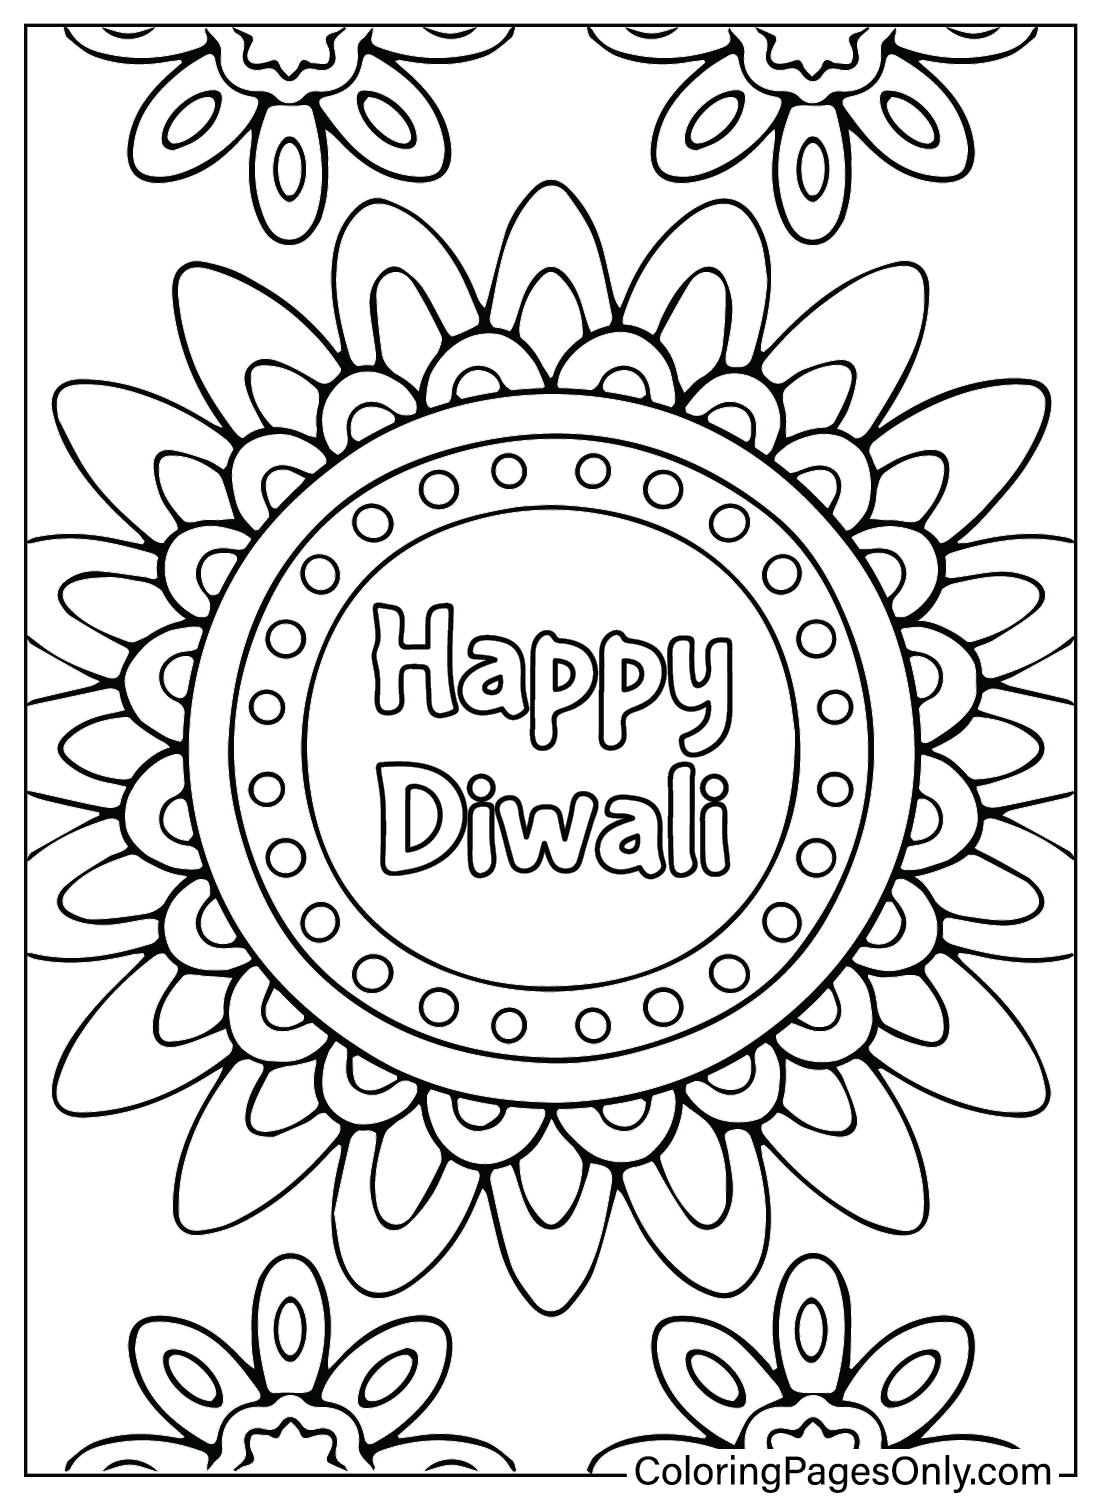 Happy Diwali Coloring Page Printable from Diwali